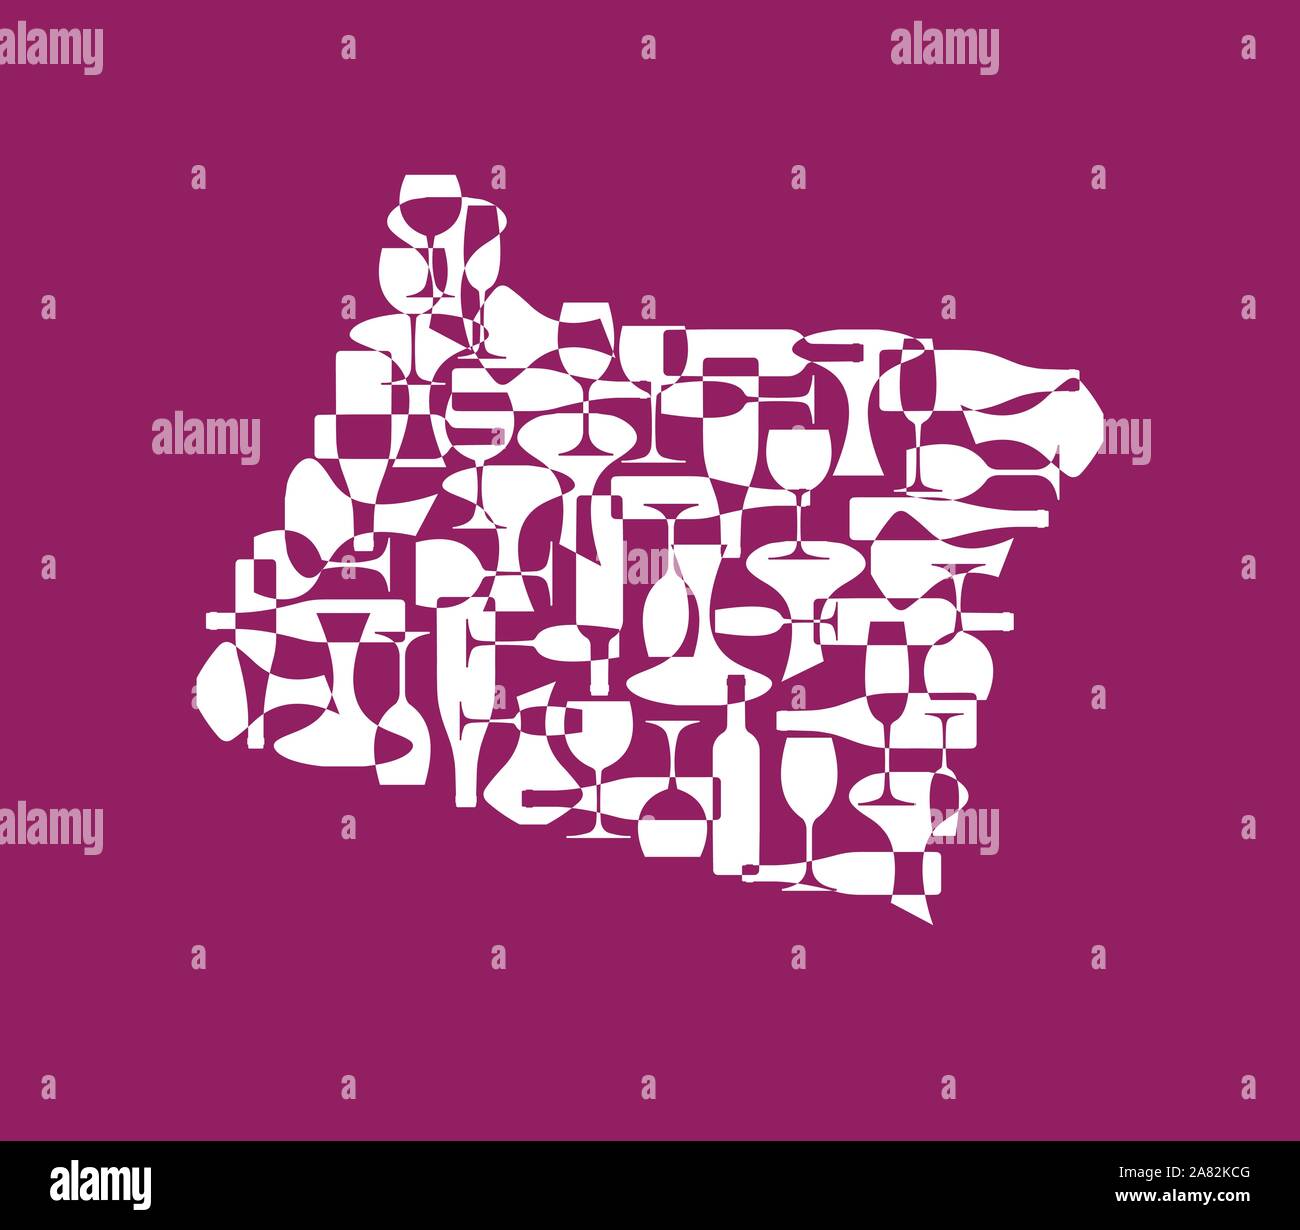 States winemakers - stylized maps from silhouettes of wine bottles, glasses and decanters. Map of Oregon. Stock Vector